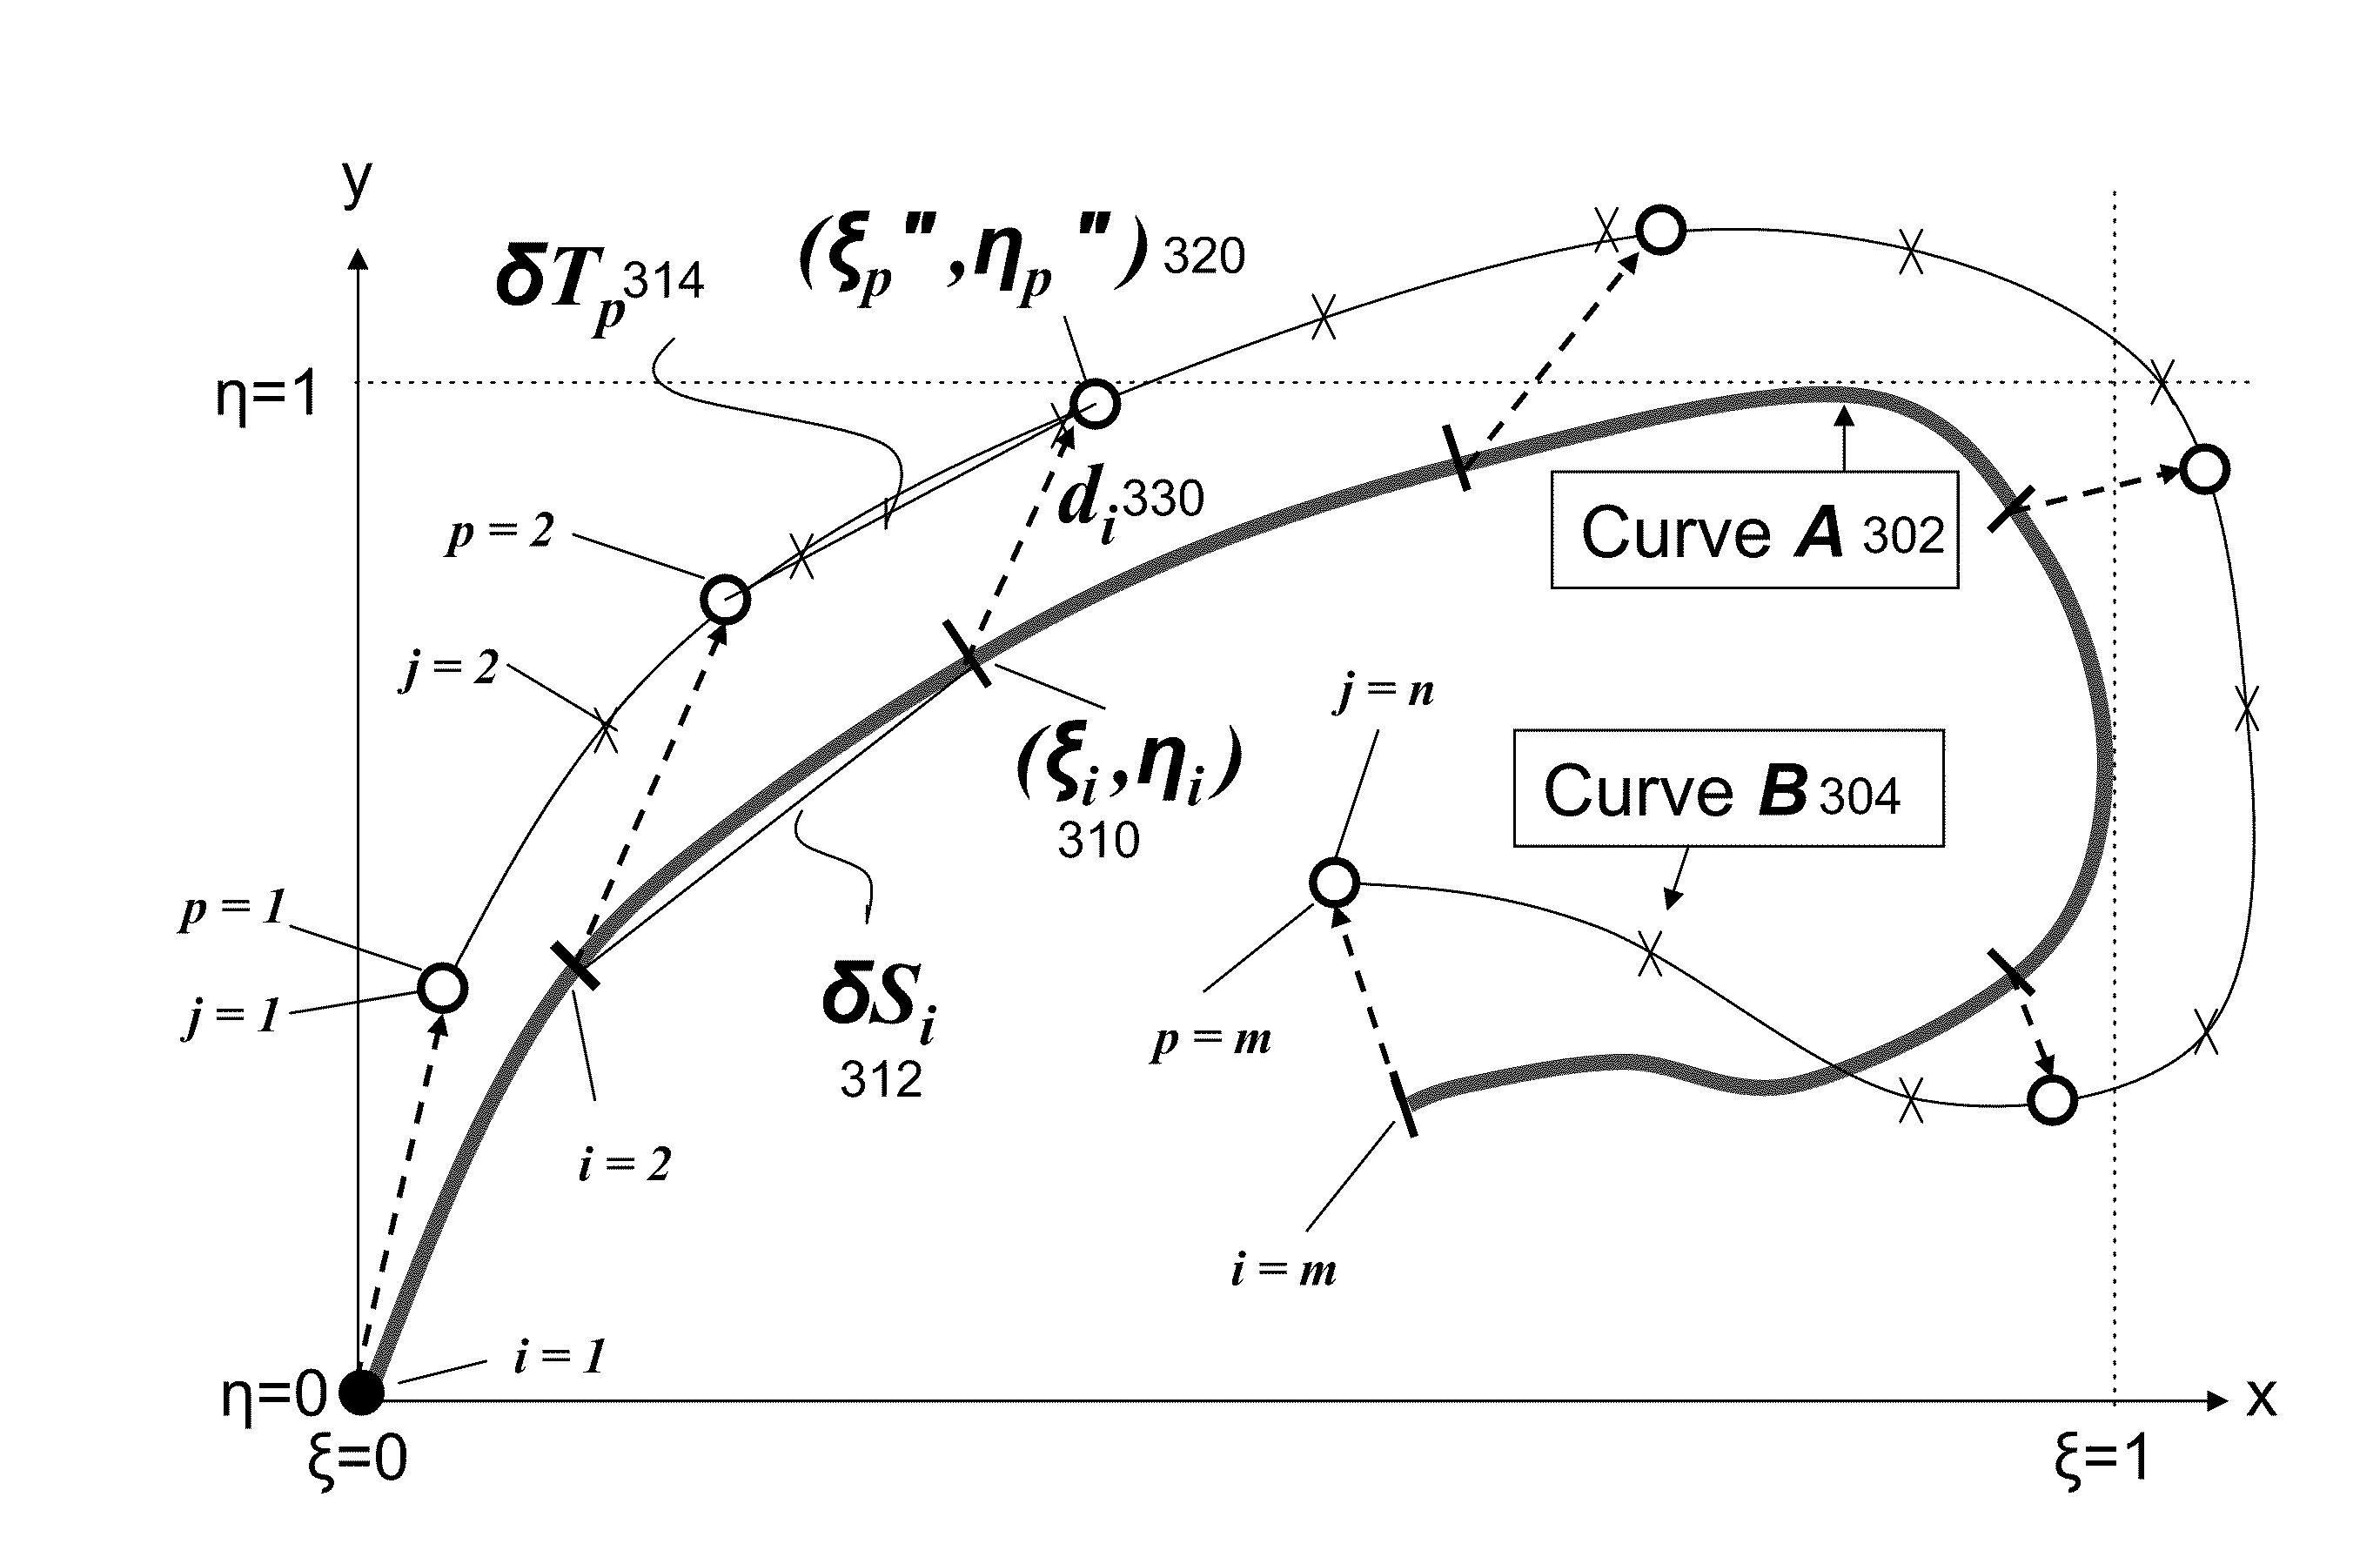 Curve Matching for Parameter Identification